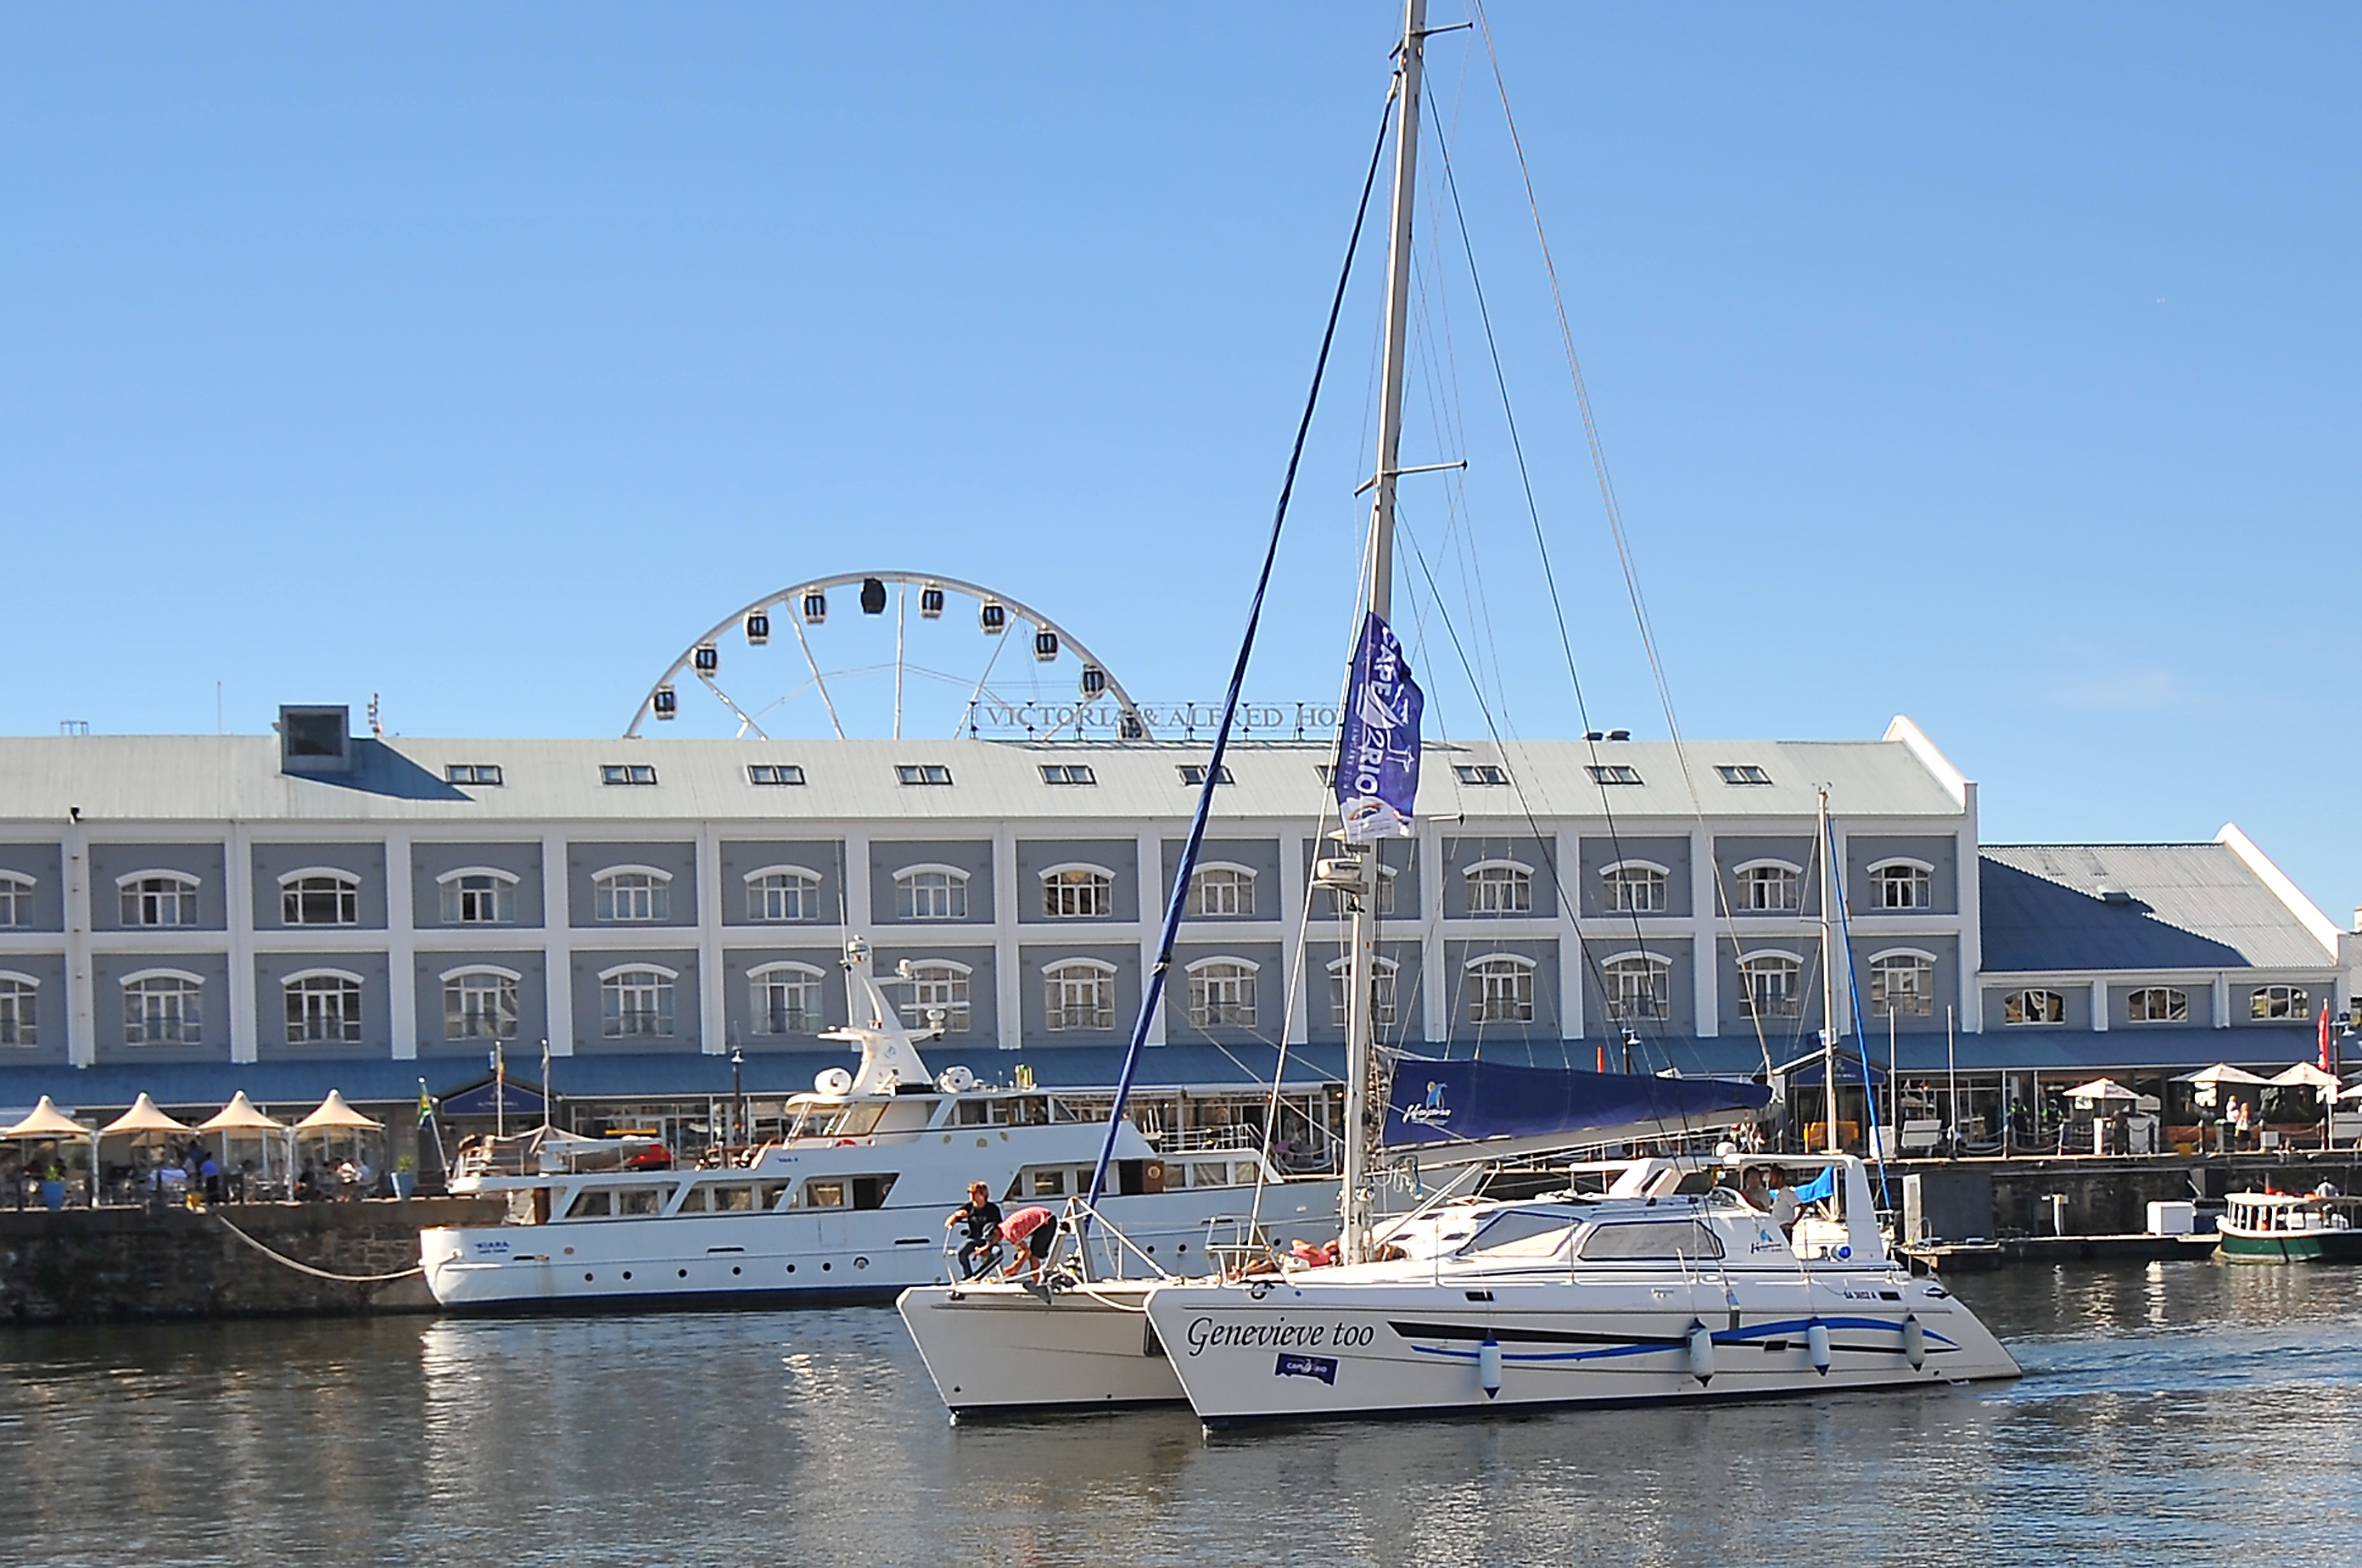 CAPE TOWN, SOUTH AFRICA - JANUARY 02: A general view of Genevieve too at the V & A Waterfront on January 02, 2014 in Cape Town, South Africa. (Photo by Ashley Vlotman/Gallo Images)